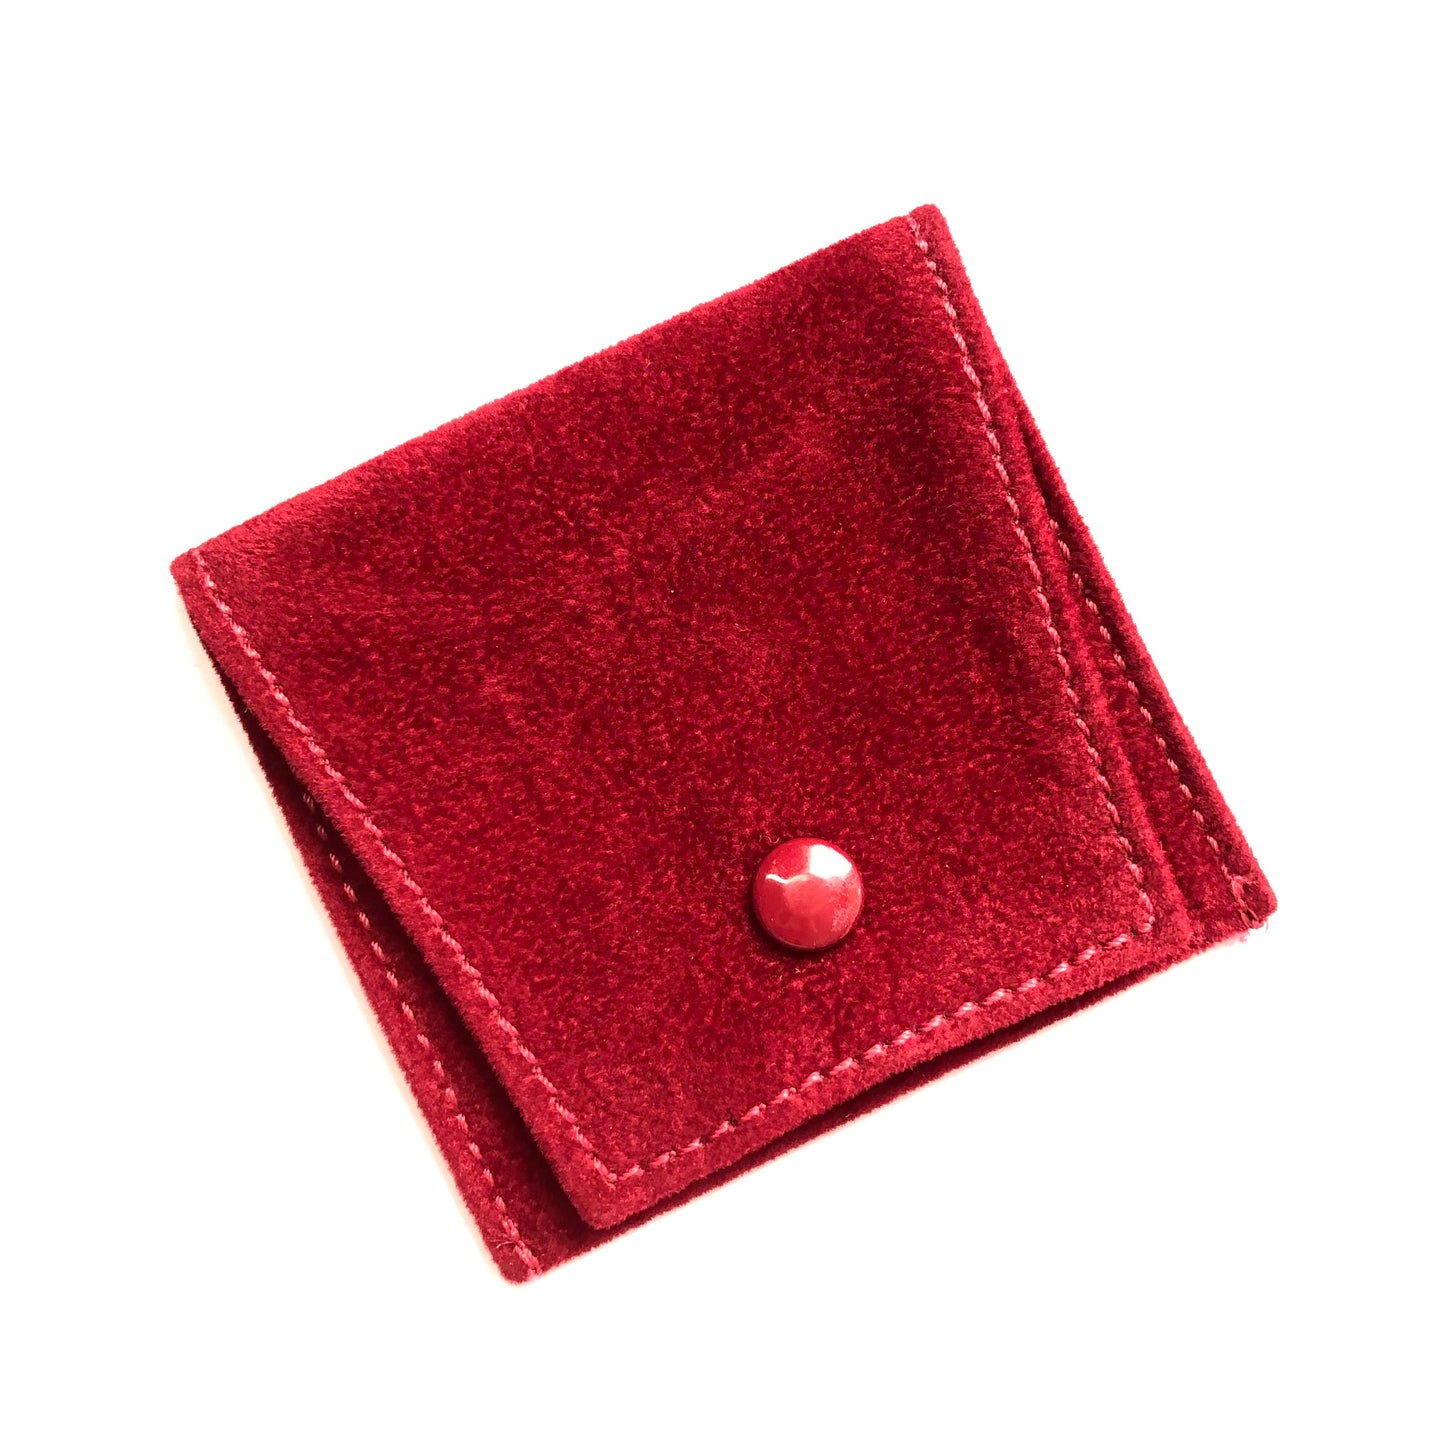 CARTIER Red Faux Suede Jewelry Pouch 2.5x2.25 inches